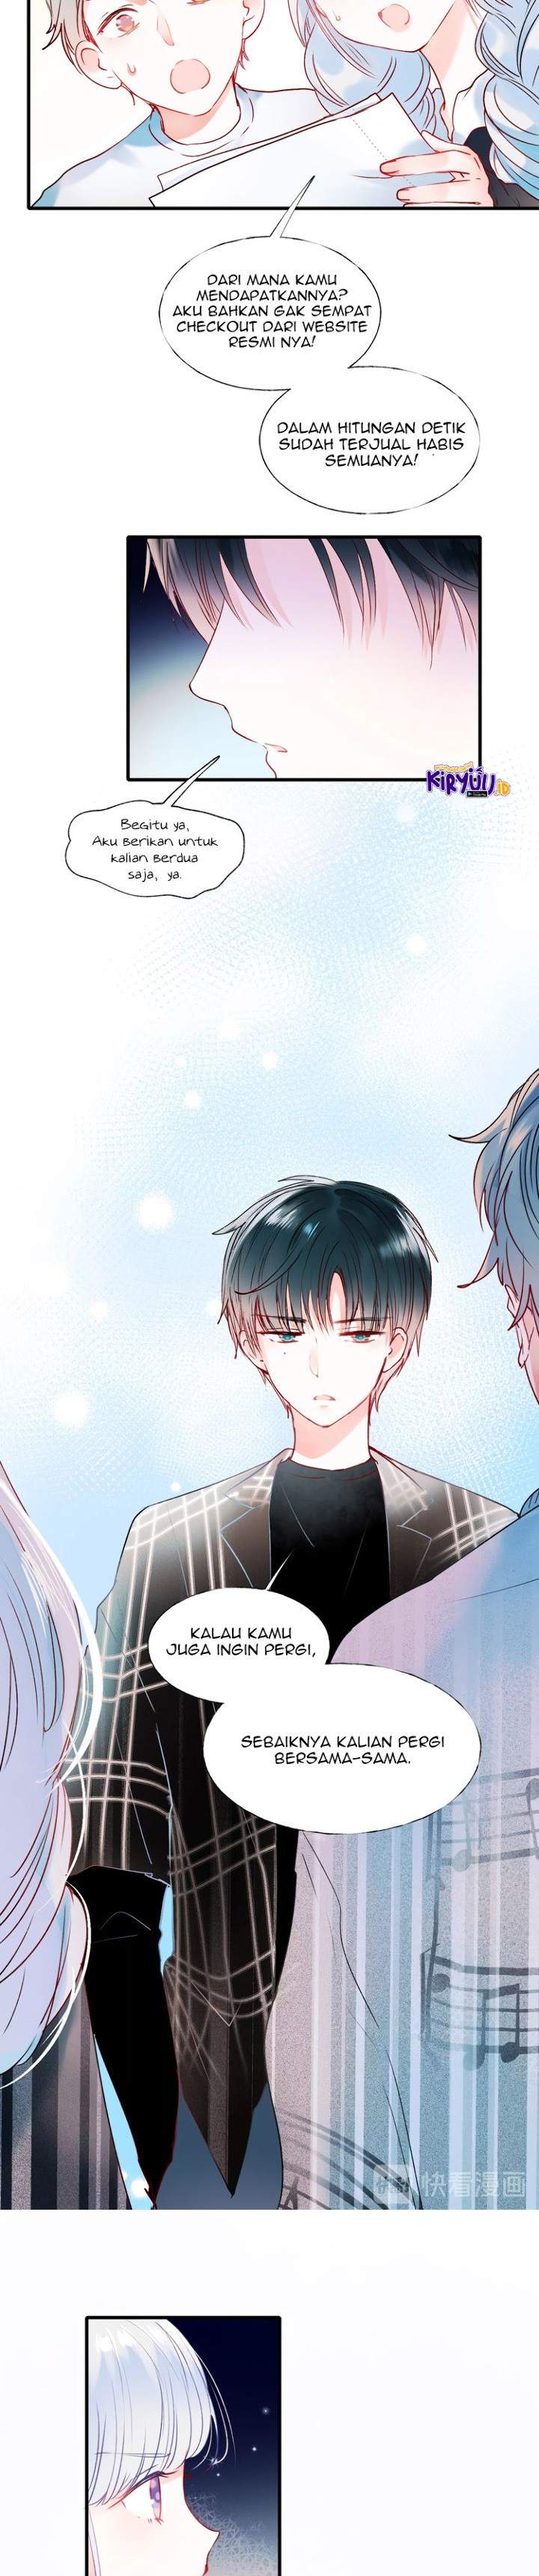 To be Winner Chapter 44